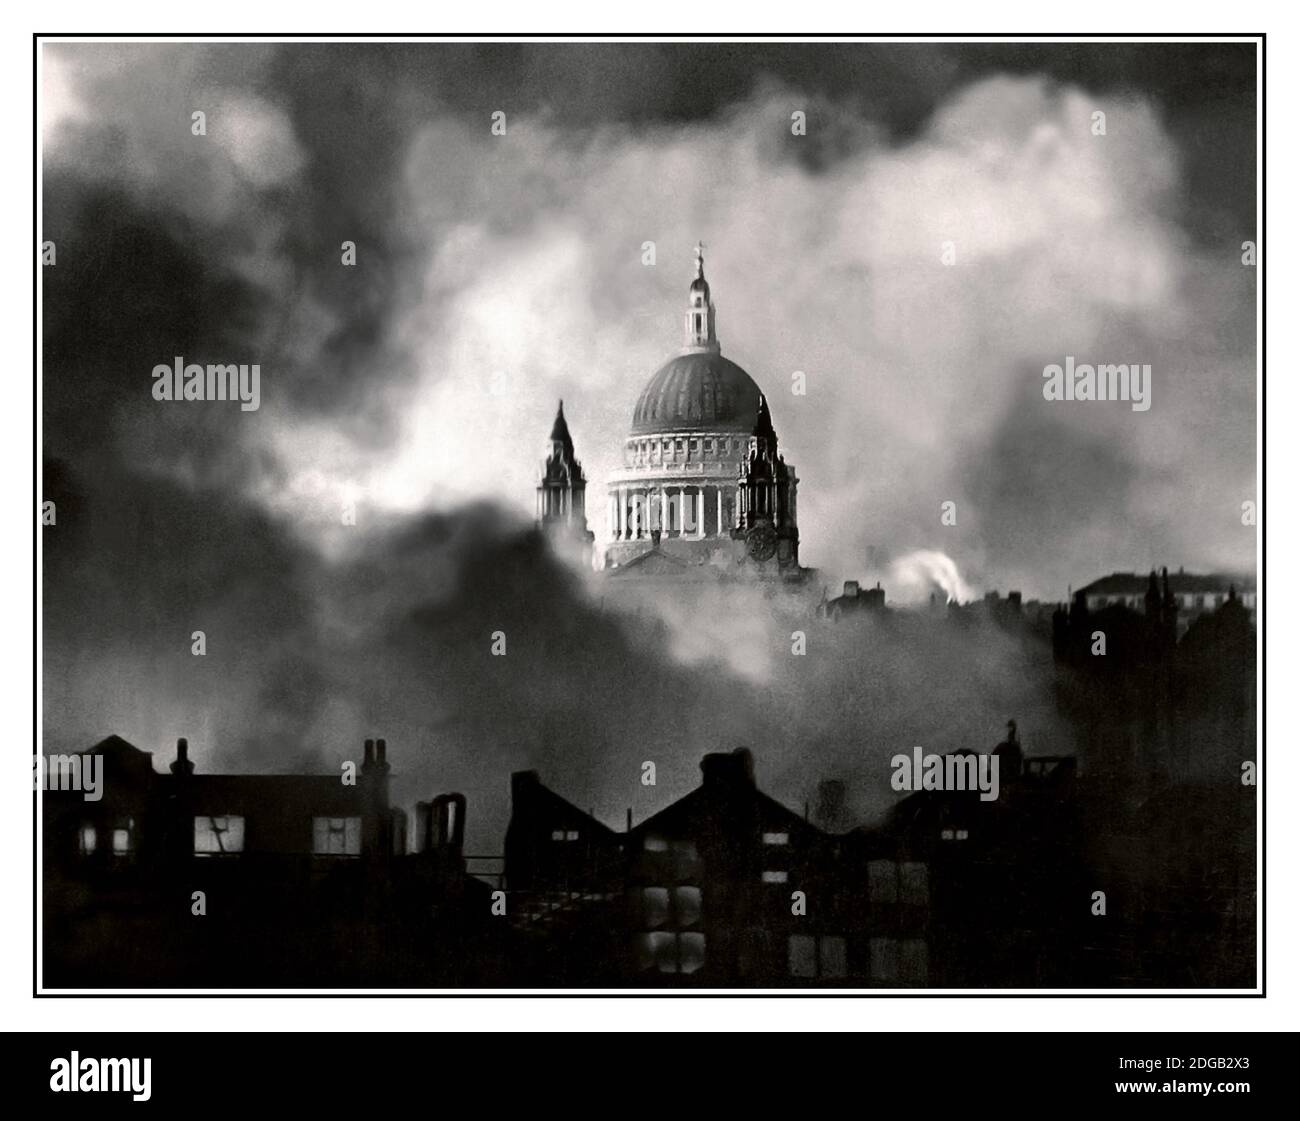 LONDON BLITZ WW2 SAINT PAULS CATHEDRAL NAZI GERMANY BOMBING St Paul's Survives. An iconic photograph of Saint Pauls Cathedral pre-planned and bravely taken in a night air raid 29/30th December 1940 by photographer Herbert Mason. This image became the symbol of resistance against the Nazi Germany Luftwaffe terror bombing of civilians. This photograph has been carefully restored and enhanced to re-create its original impact and quality. Stock Photo